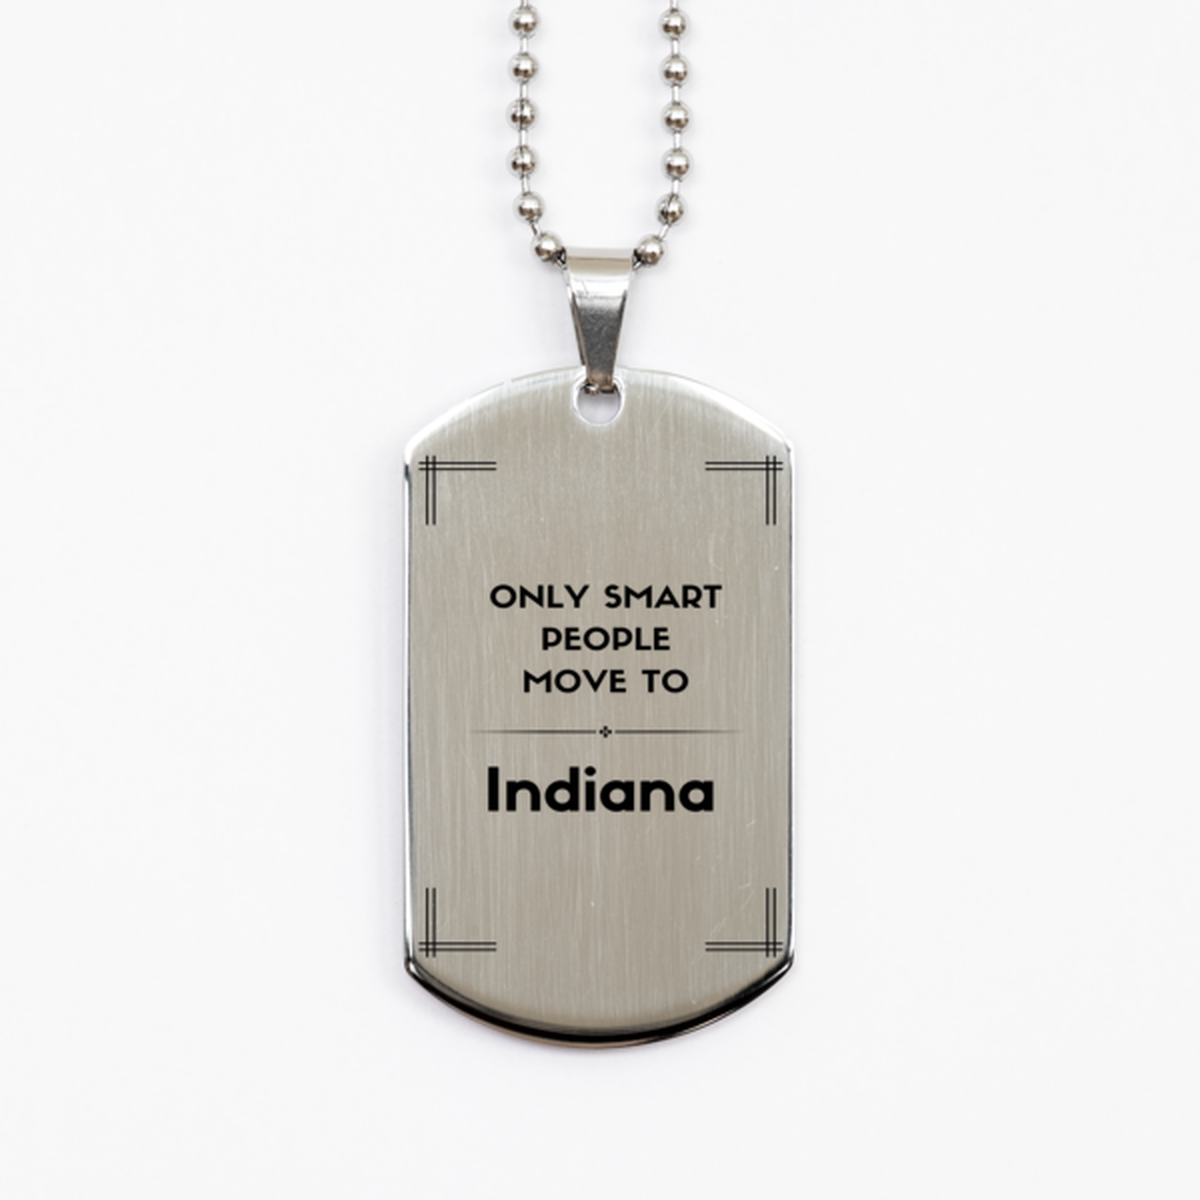 Only smart people move to Indiana Silver Dog Tag, Gag Gifts For Indiana, Move to Indiana Gifts for Friends Coworker Funny Saying Quote